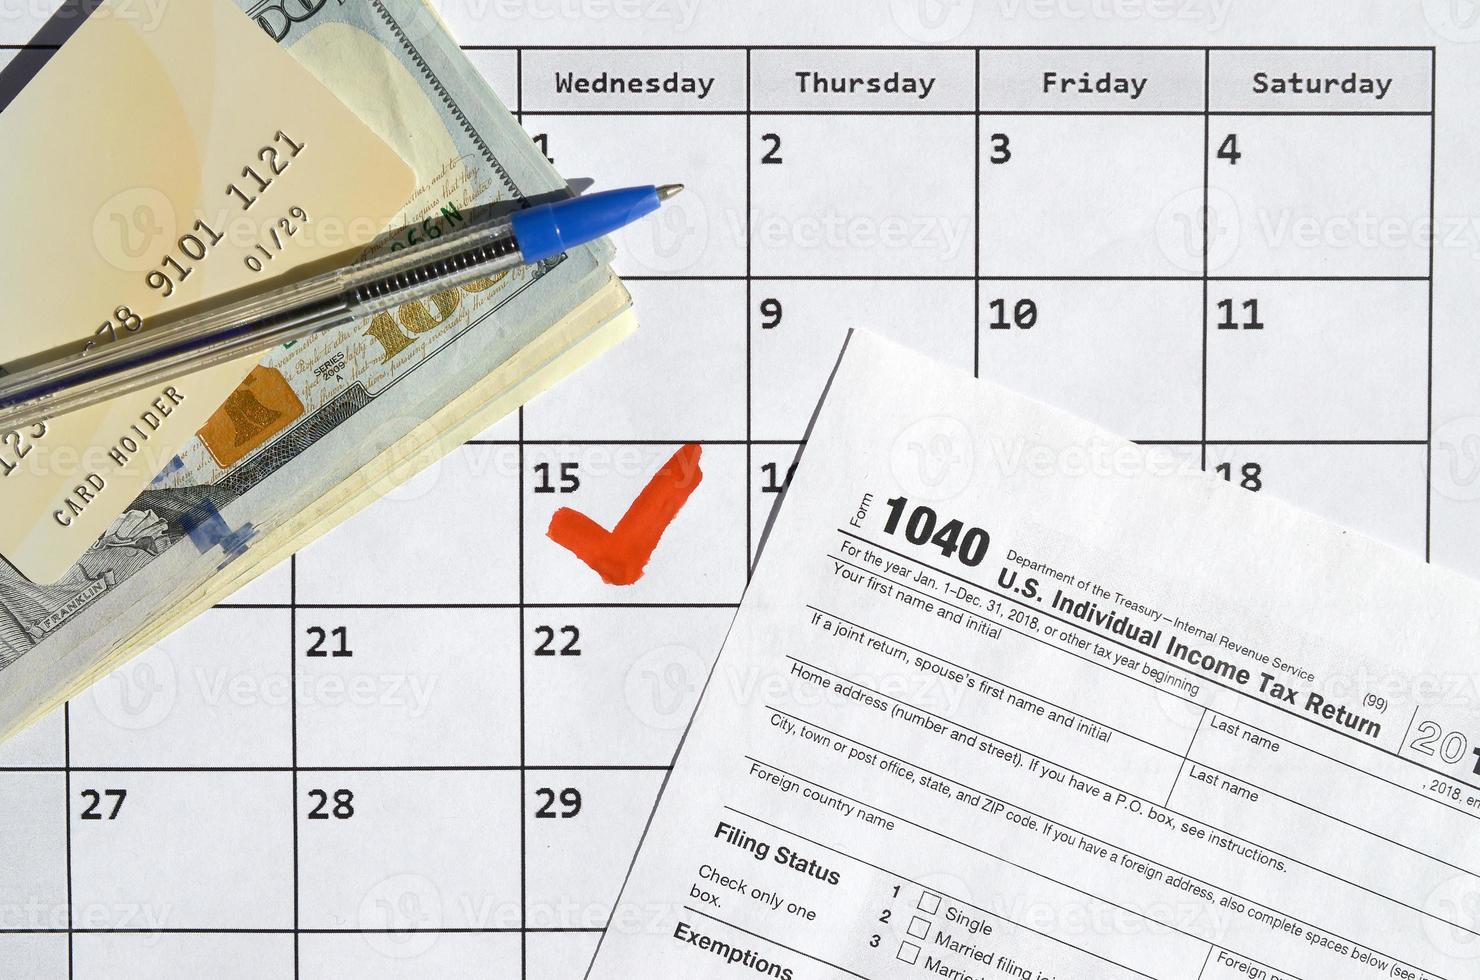 1040 Individual Income Tax Return blank with credit card on dollar bills and pen on calendar page with marked 15th April photo